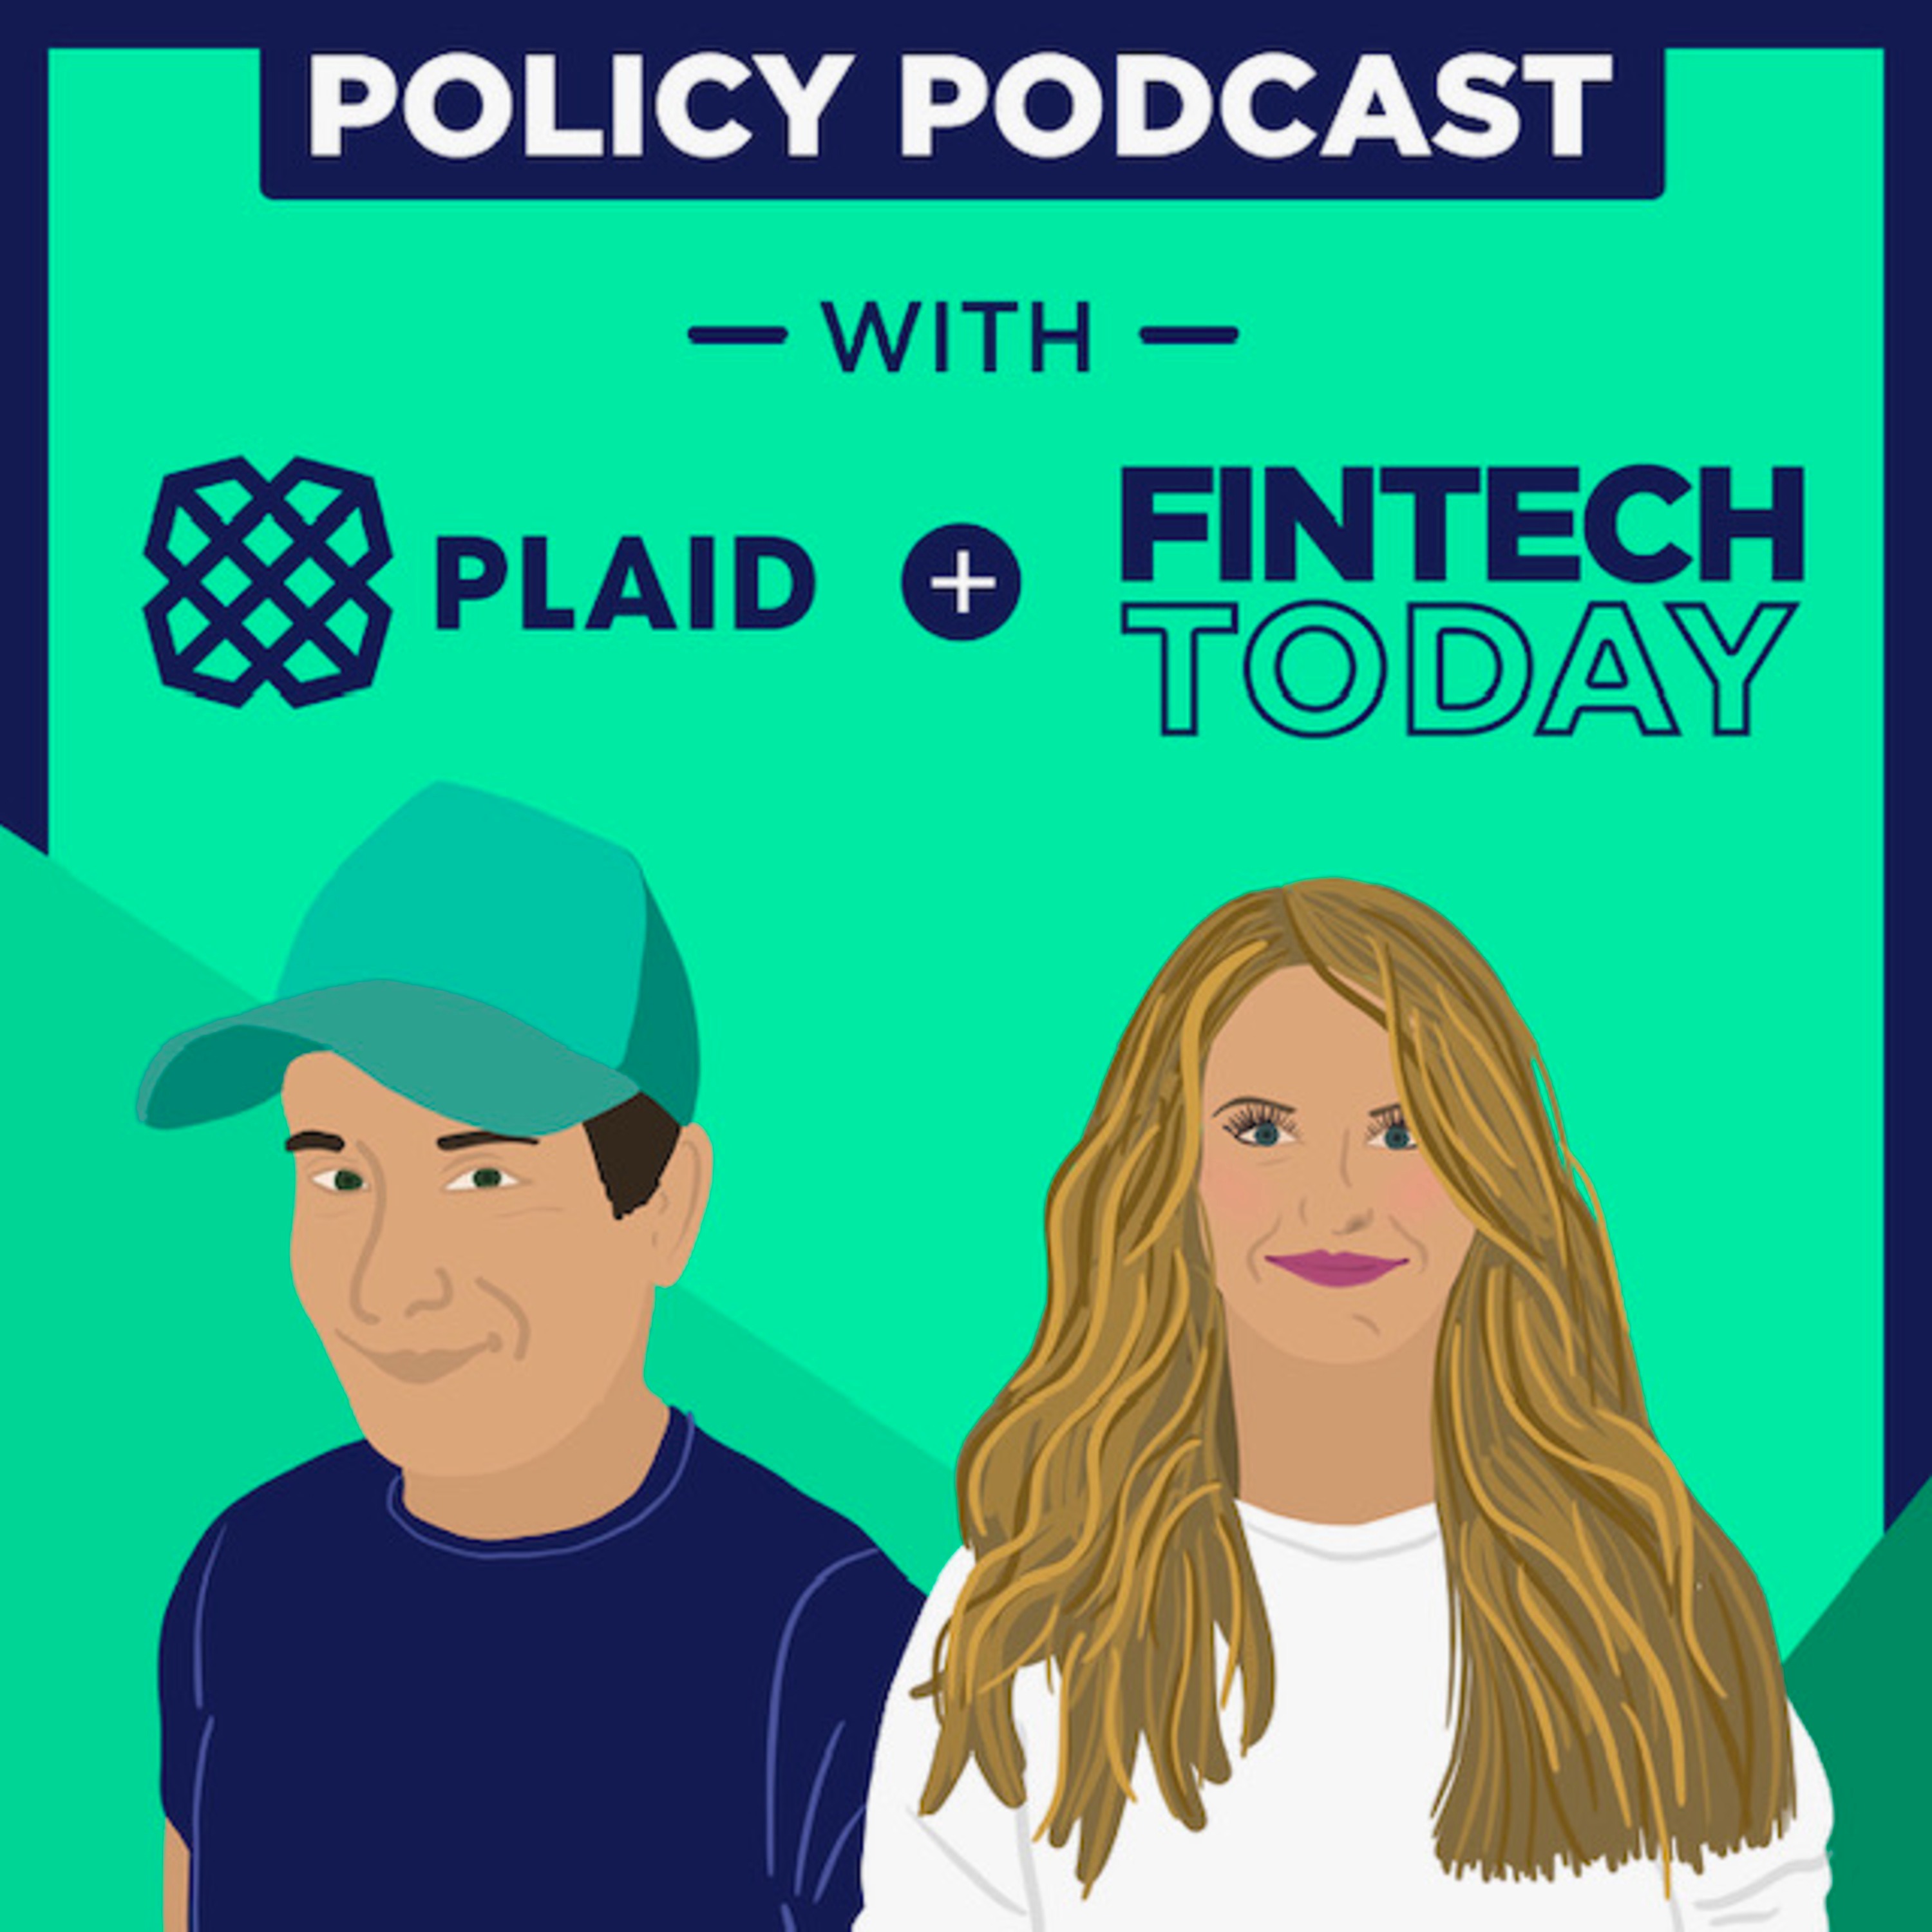 Policy Podcast with Plaid and Fintech Today Album Art